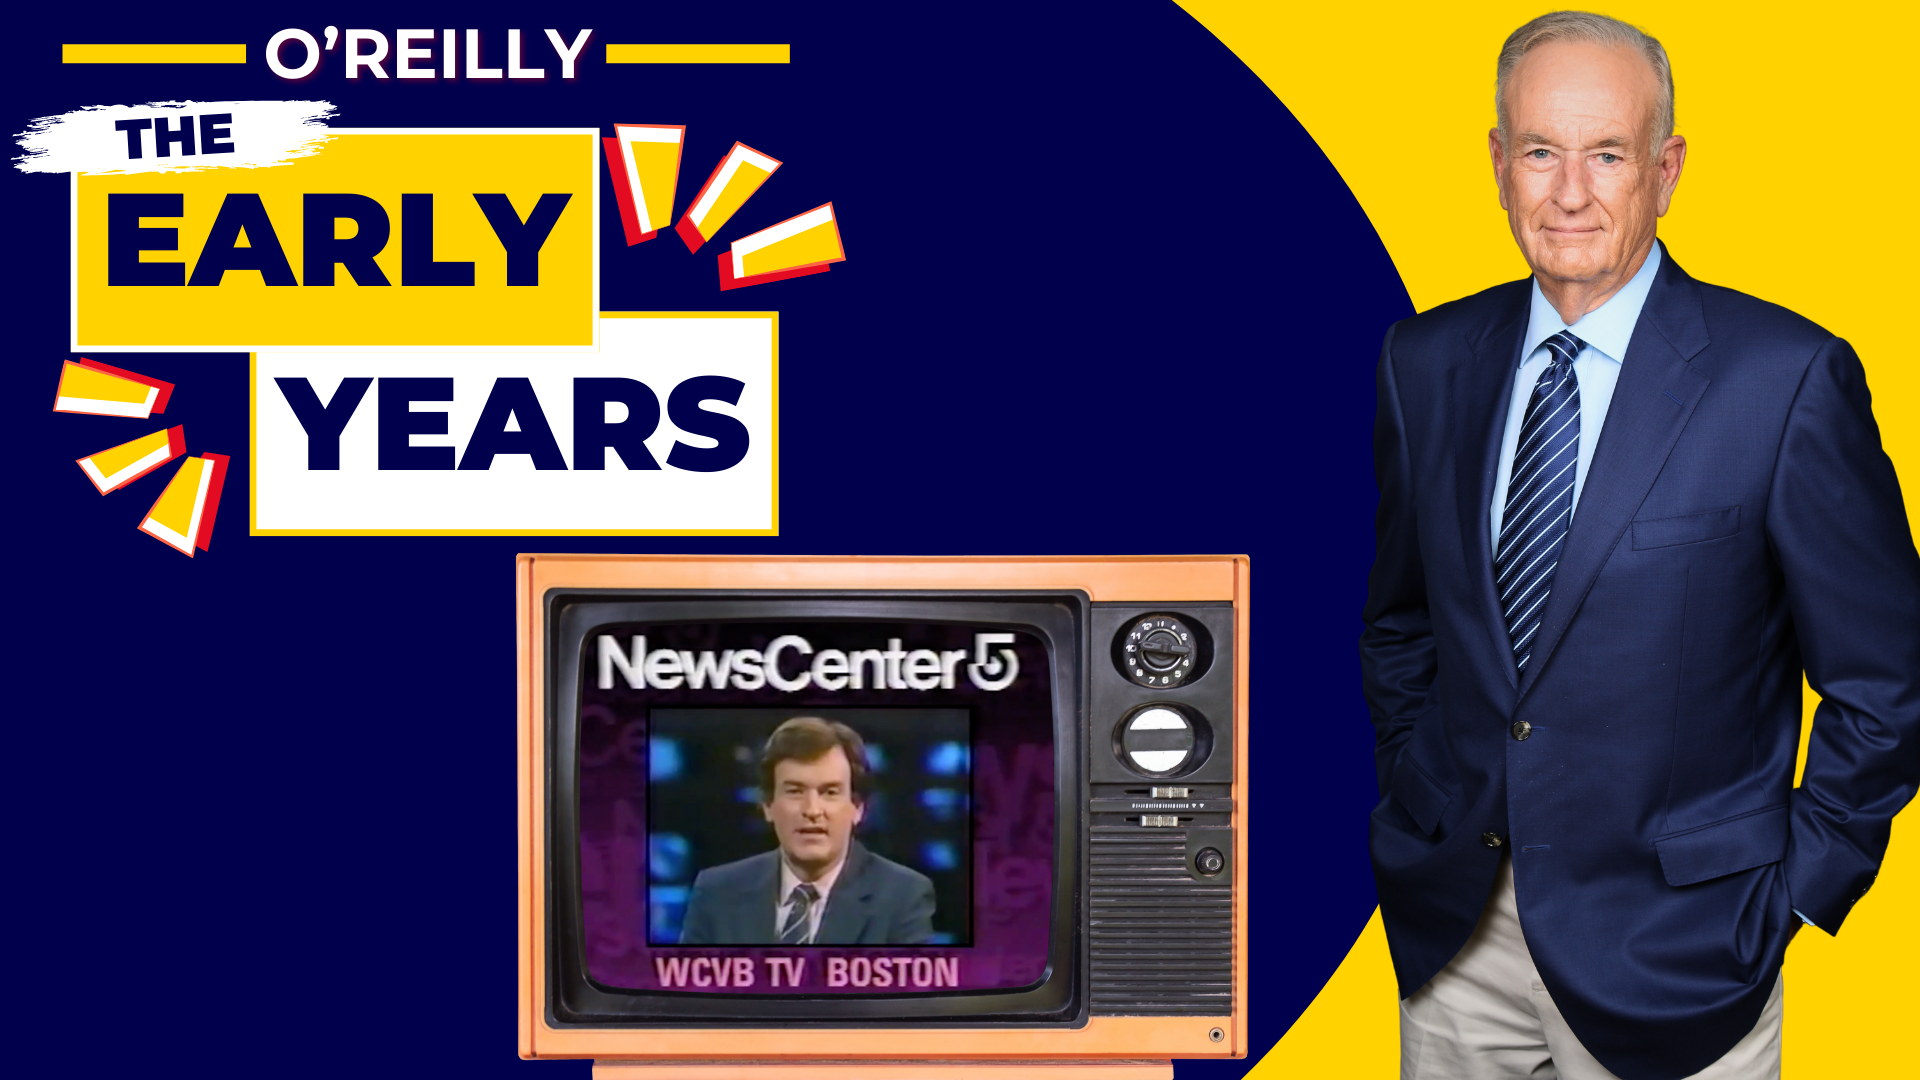 O'Reilly: The Early Years